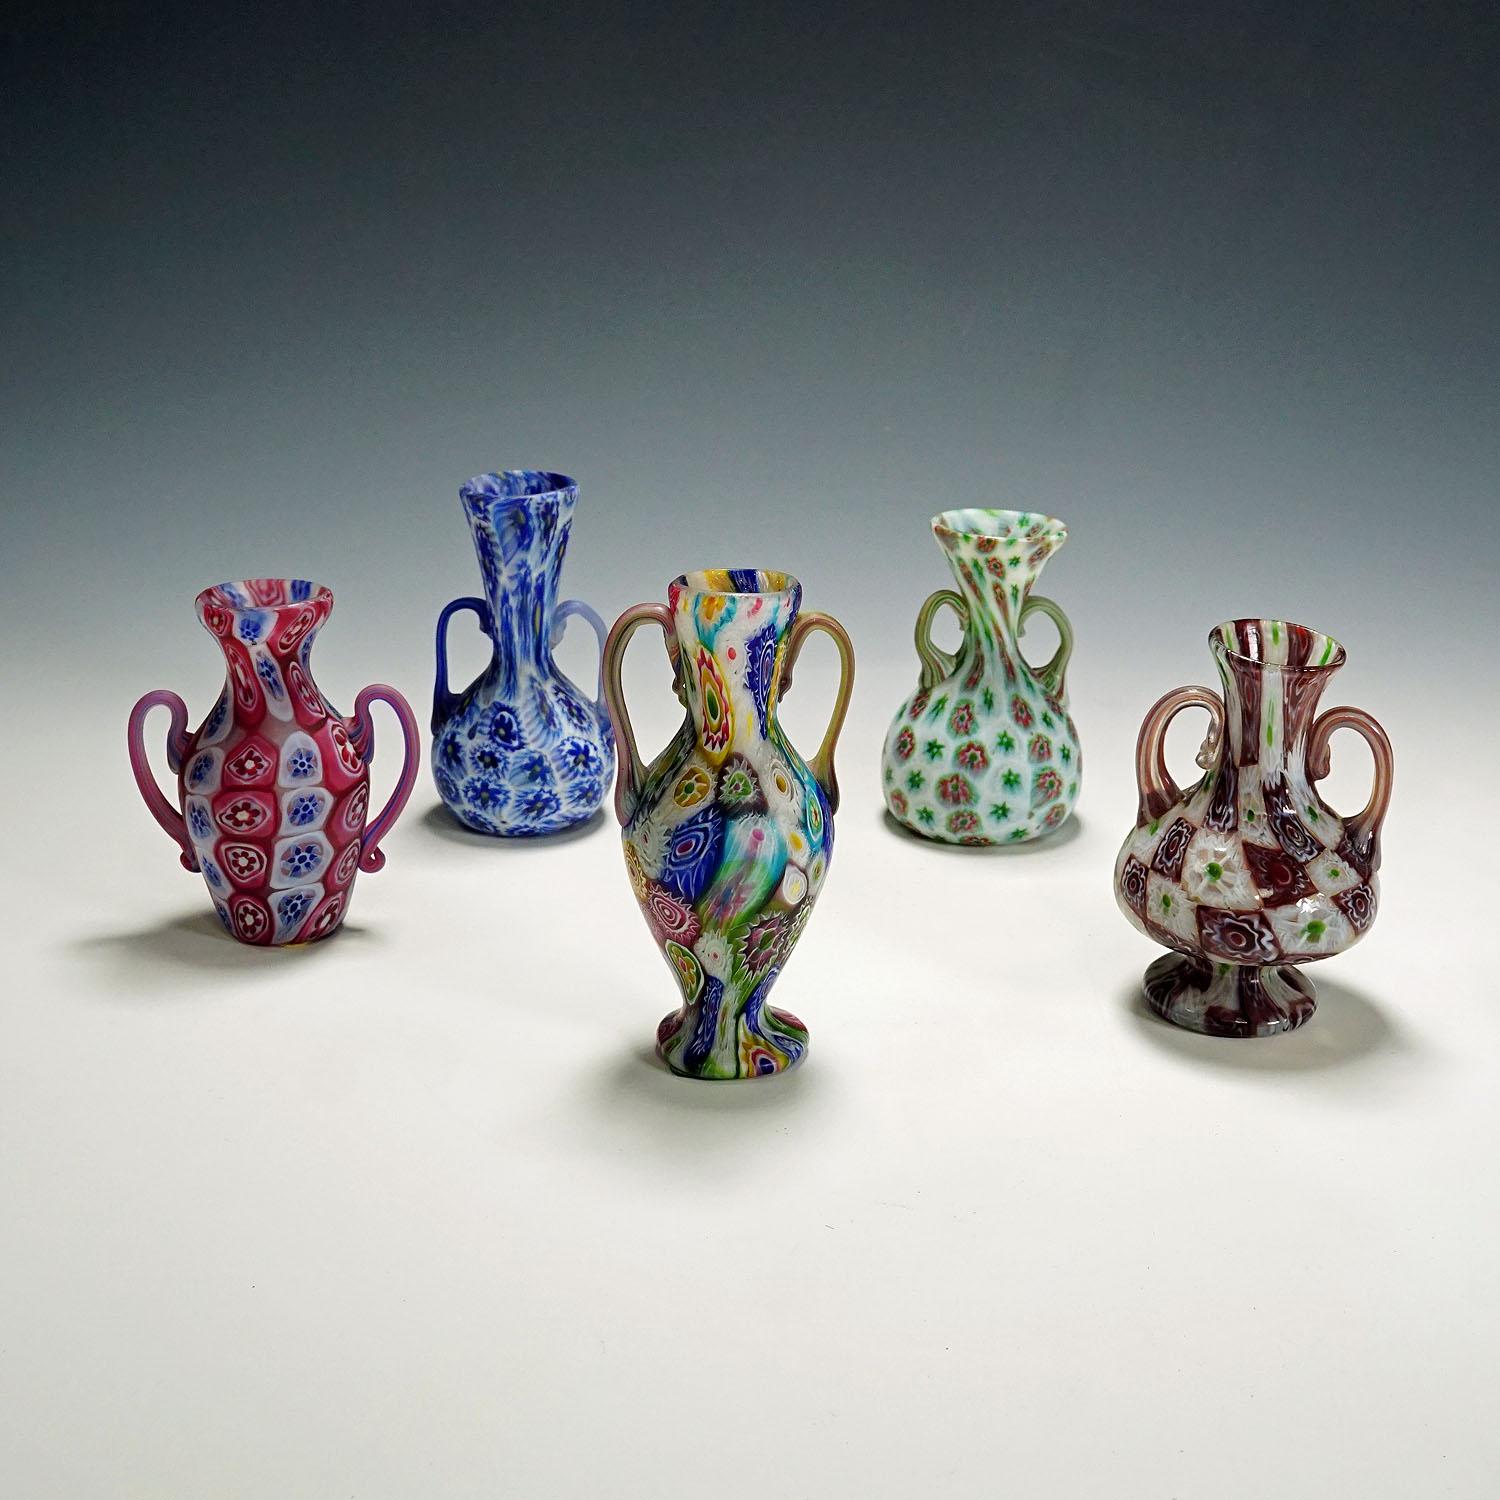 Set of Handeled Millefiori Vases by Fratelli Toso, Murano circa 1910

A set of five millefiore murrine glass vases, manufactured by Vetreria Fratelli Toso around 1910-20.  All vases feature two handles and are executed with polychrome multicoloured